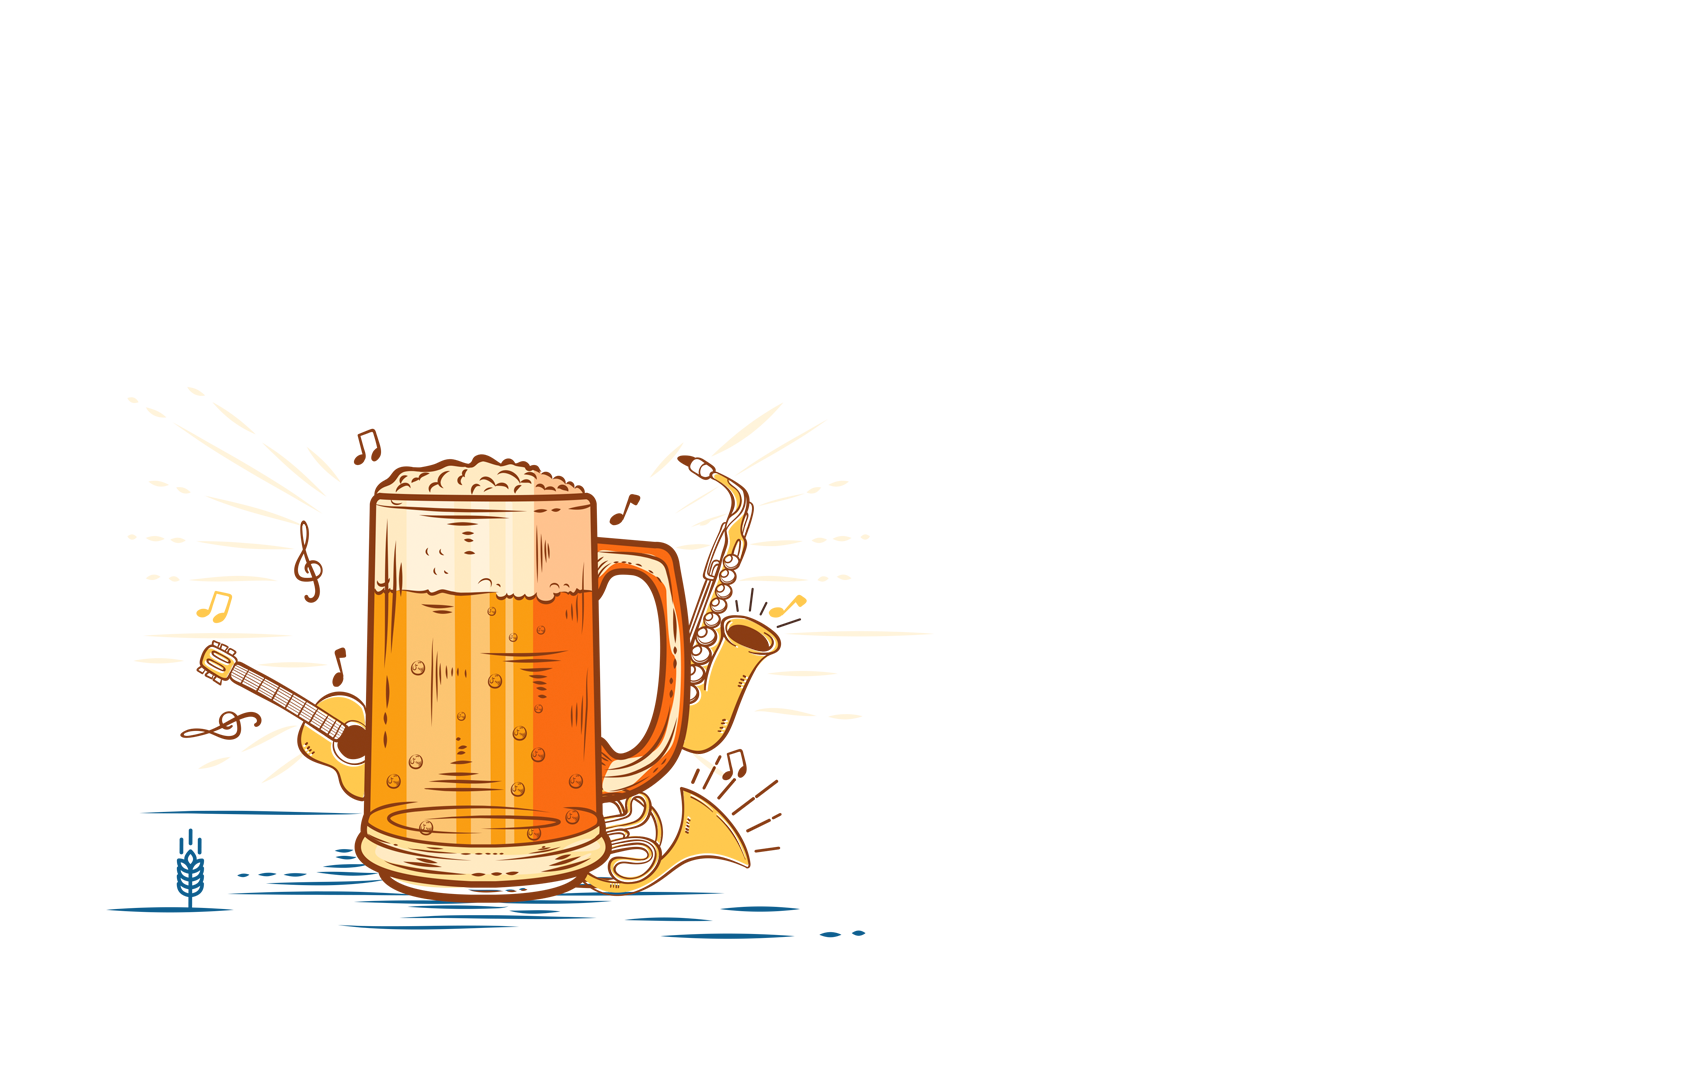 Beer And Wine Festival - AltaPlaza Mall Panamá